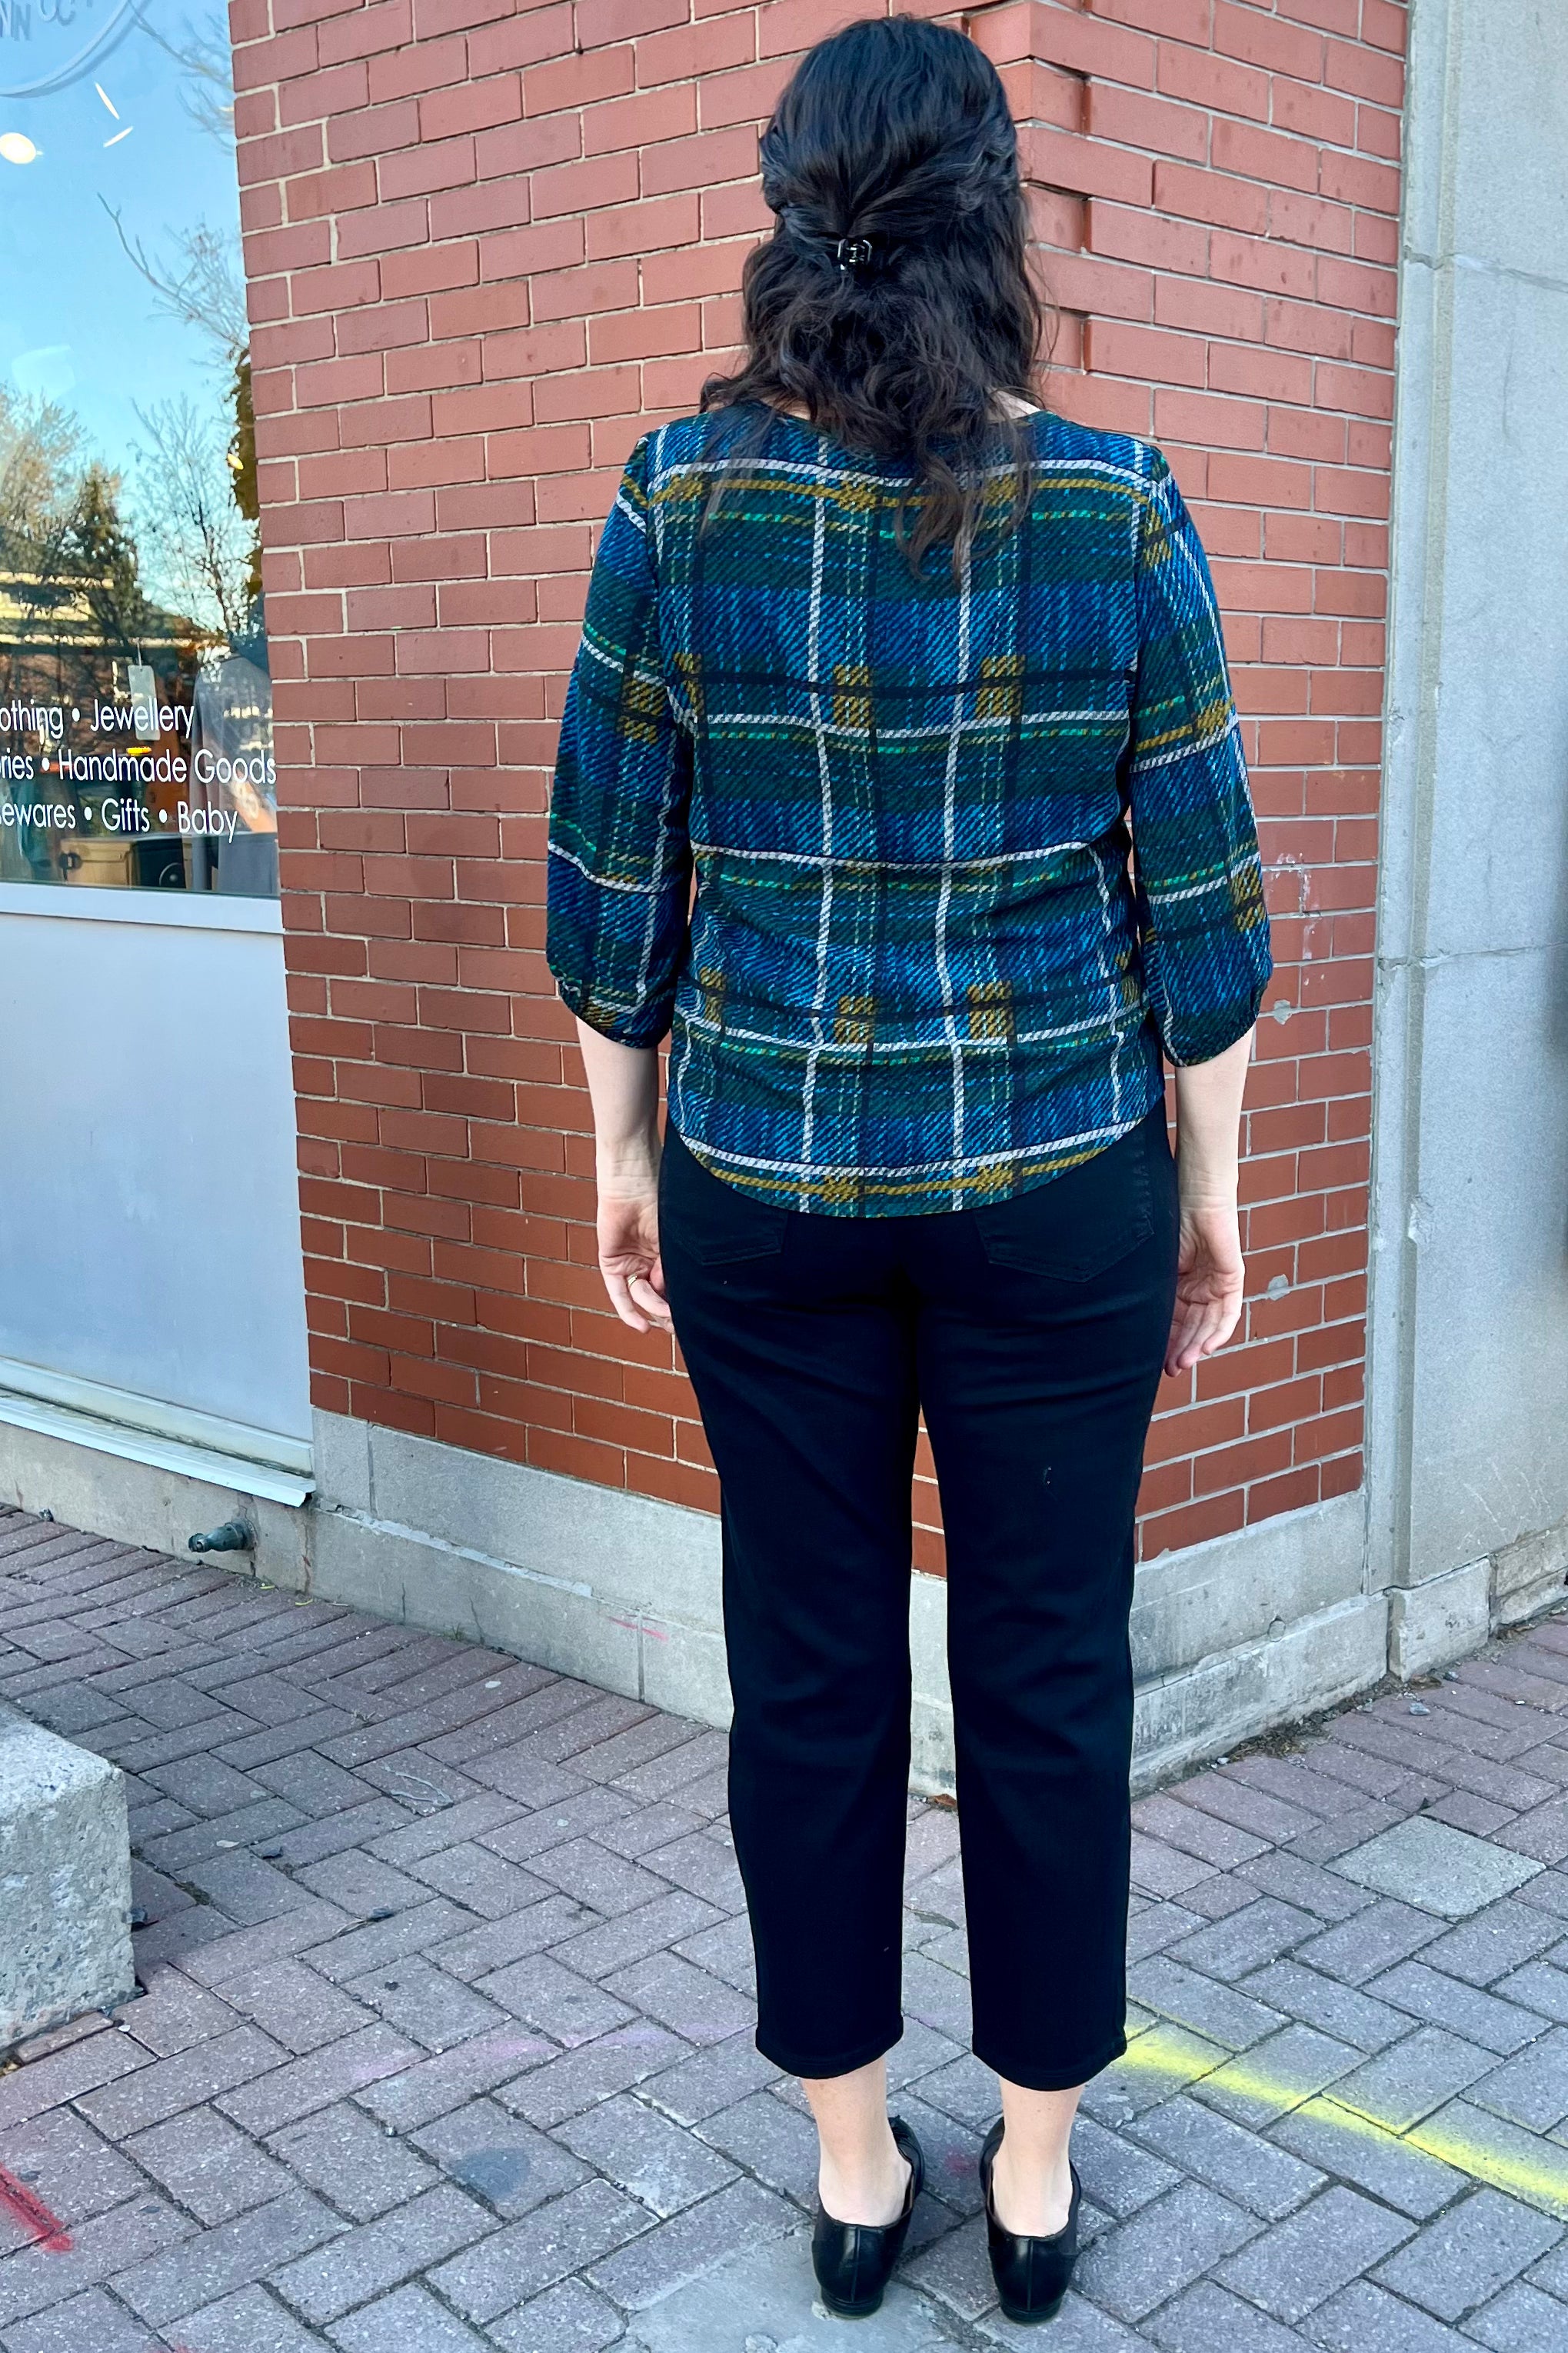 Solo Plaid Blouse by Mandala, Blue, back view, wide neck, 3/4 sleeves with gathered cuff and covered button detail, back yoke, french darts, rounded hem, loose fit, sizes XS to L, made in Ontario